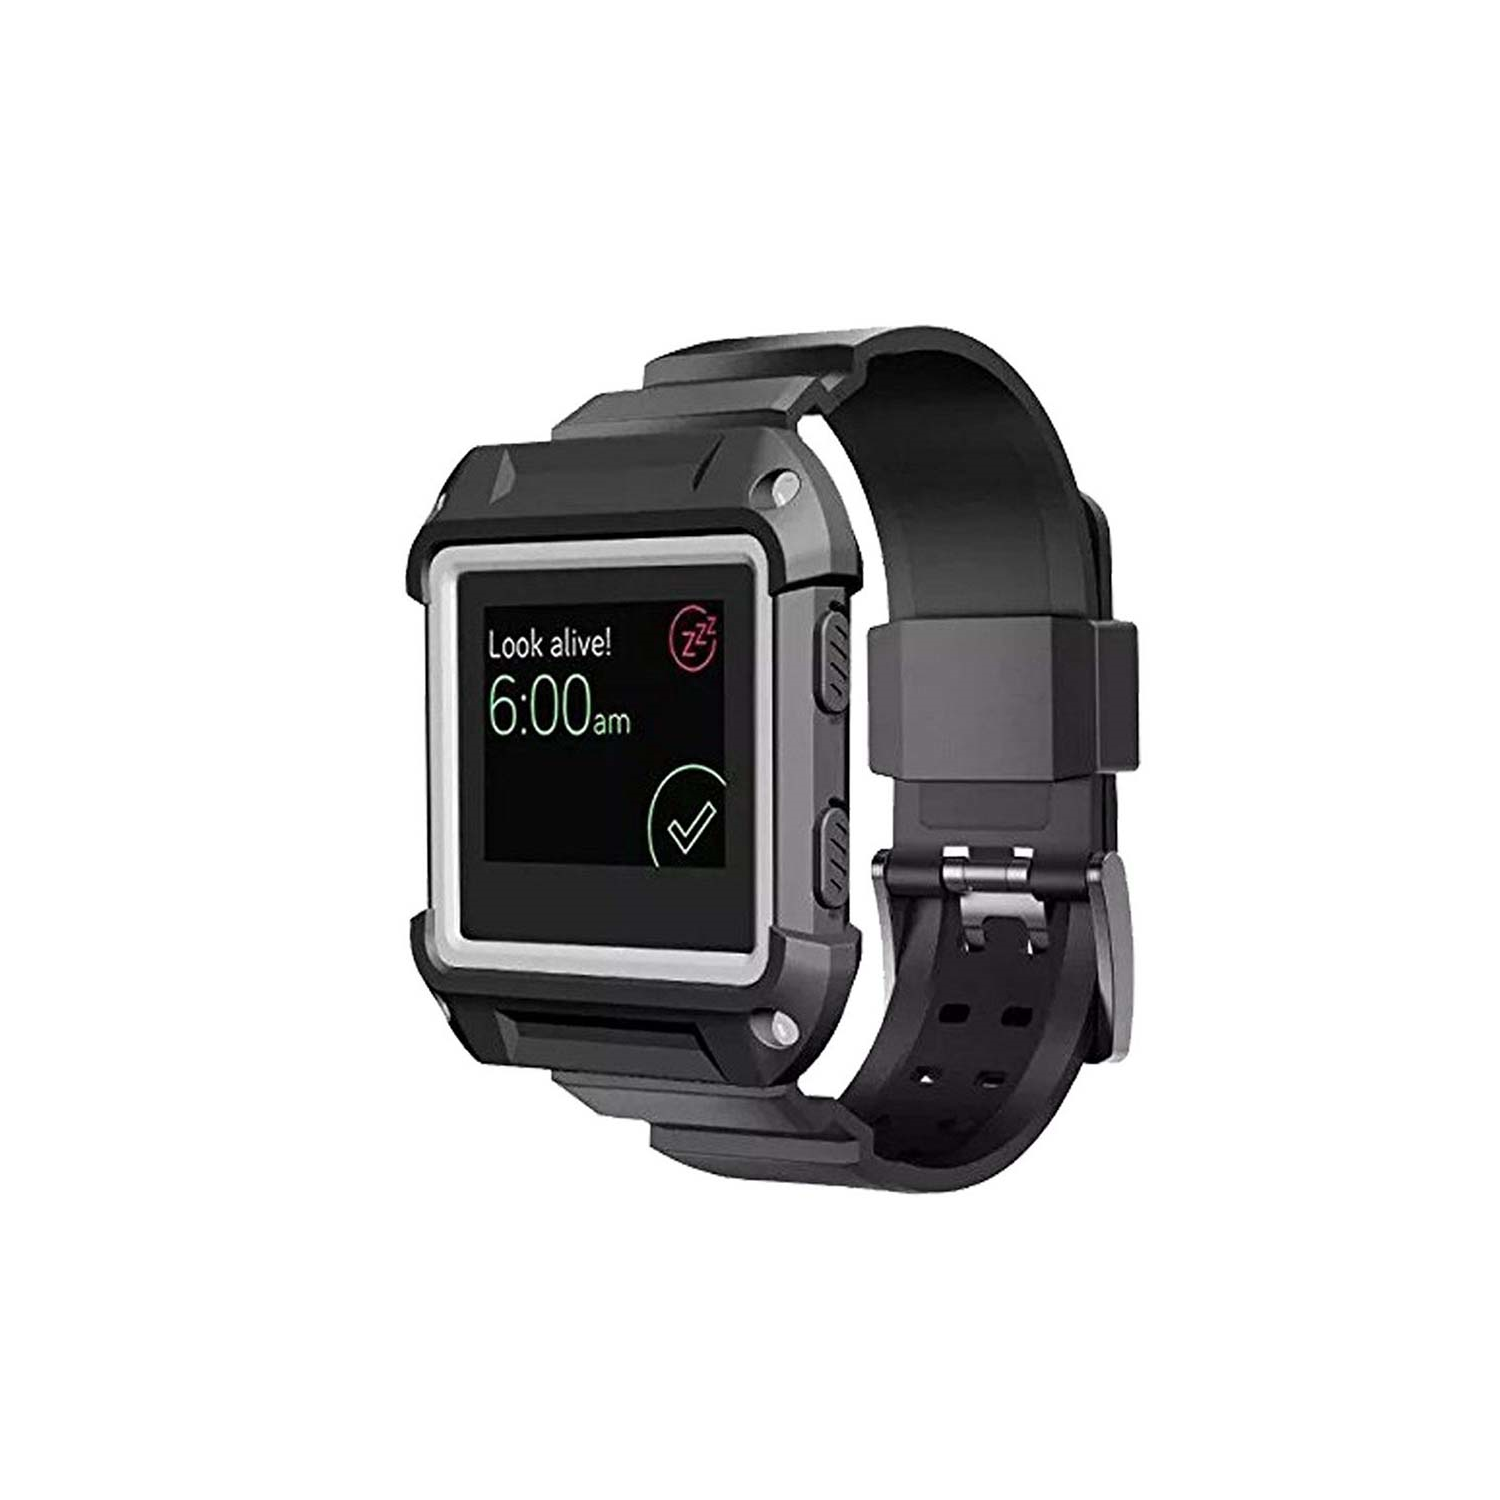 Fitbit Blaze Tracker Protective Case Cover with Silicone Band in Black w/ White Trim